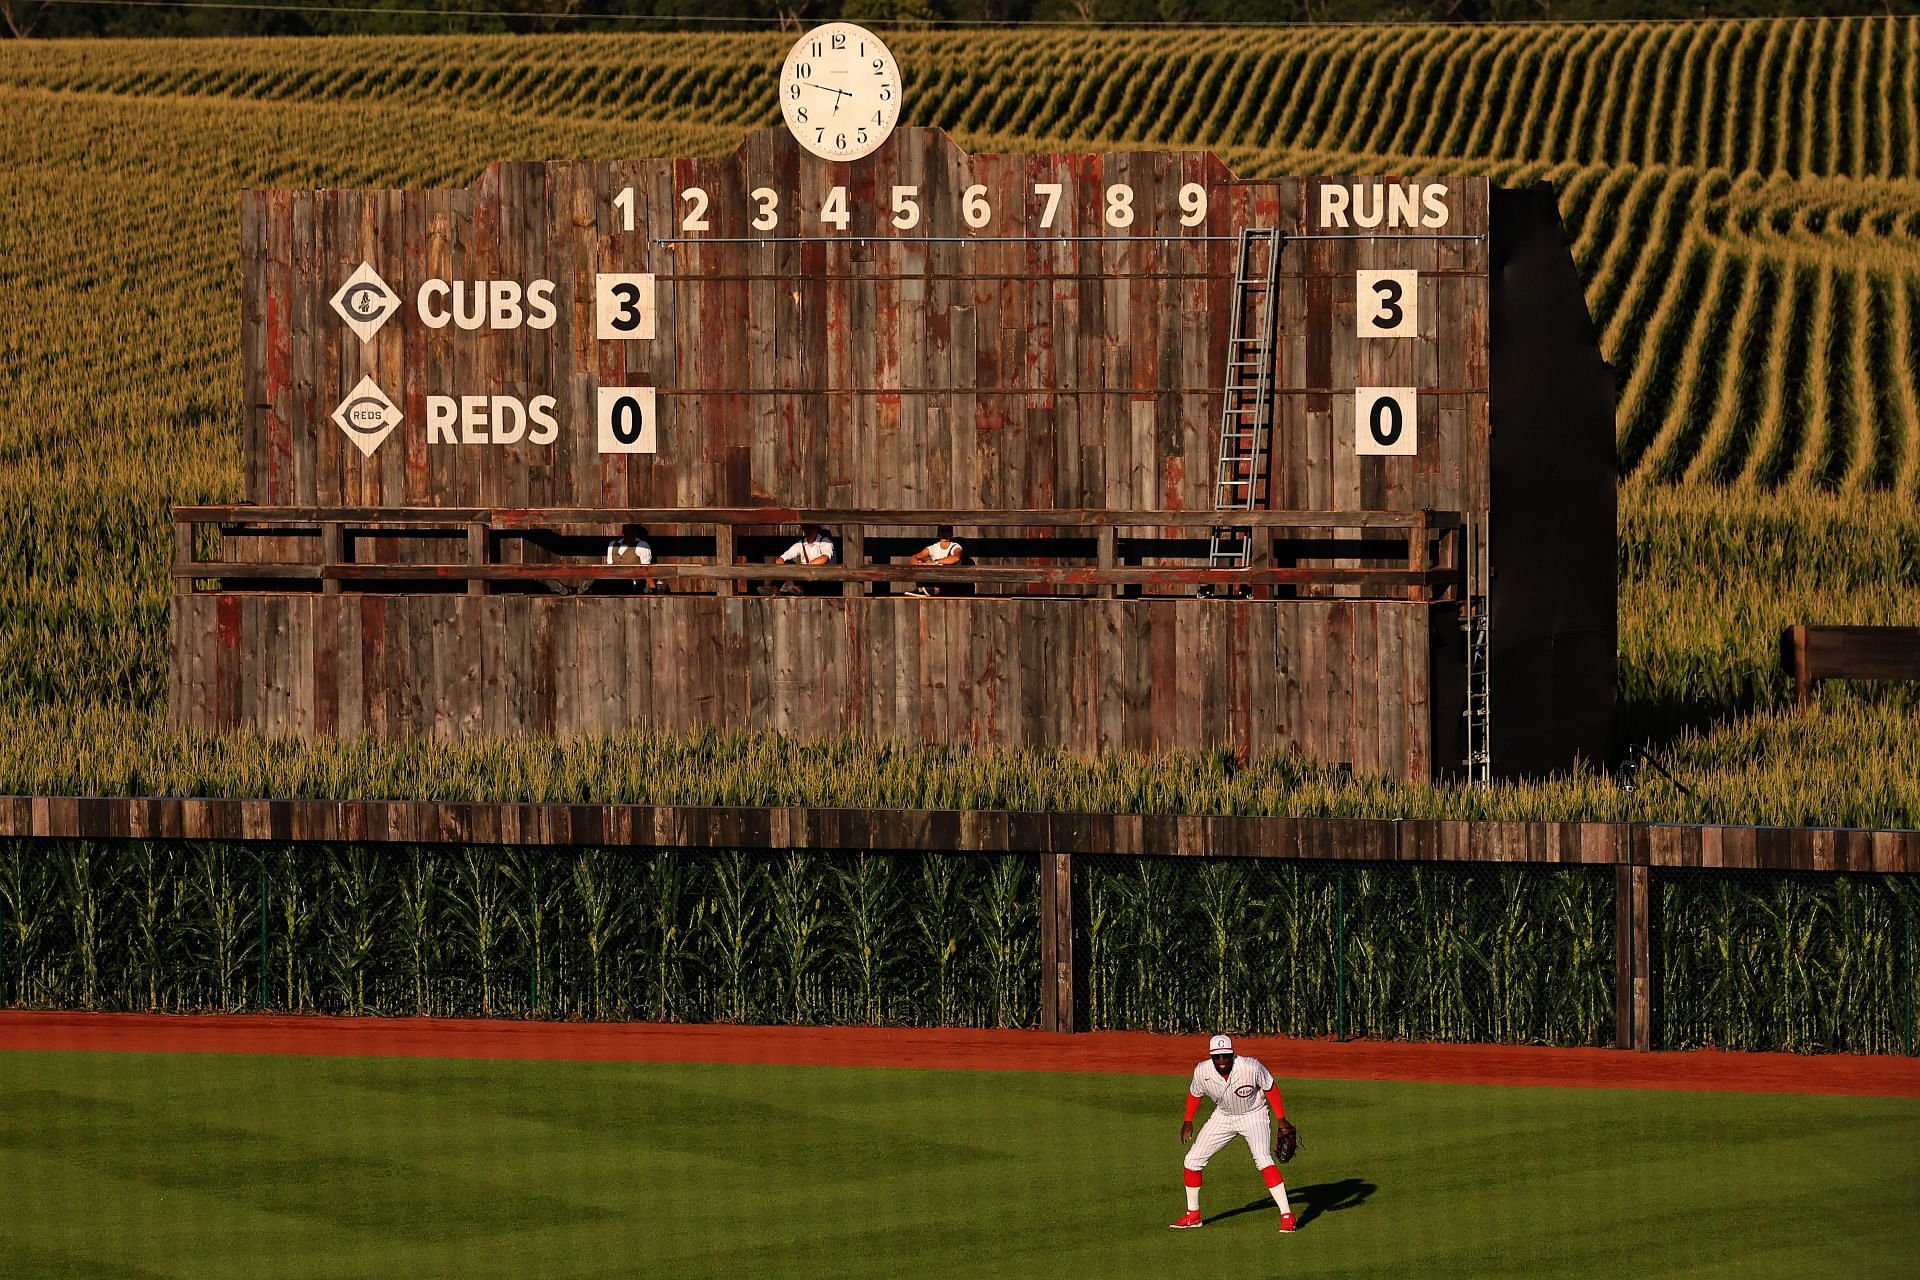 2022 MLB Field of Dreams Uniforms Unveiled: Reds, Cubs Throw it